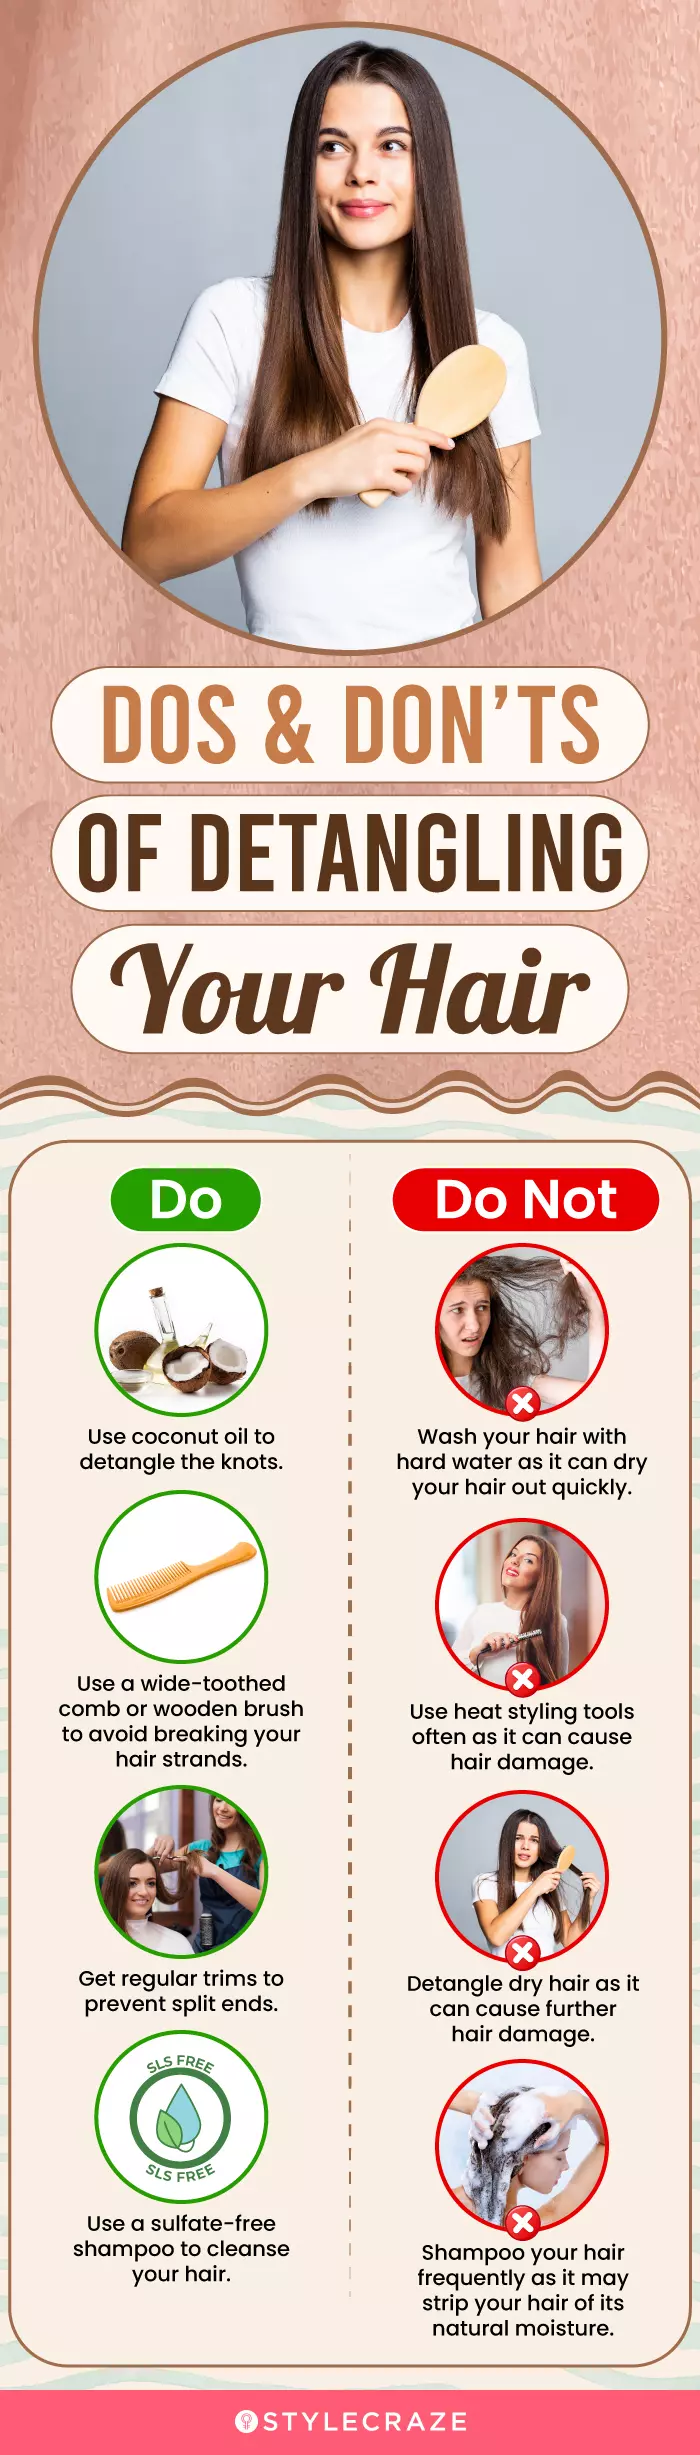 dos and don’ts of detangling your hair (infographic)